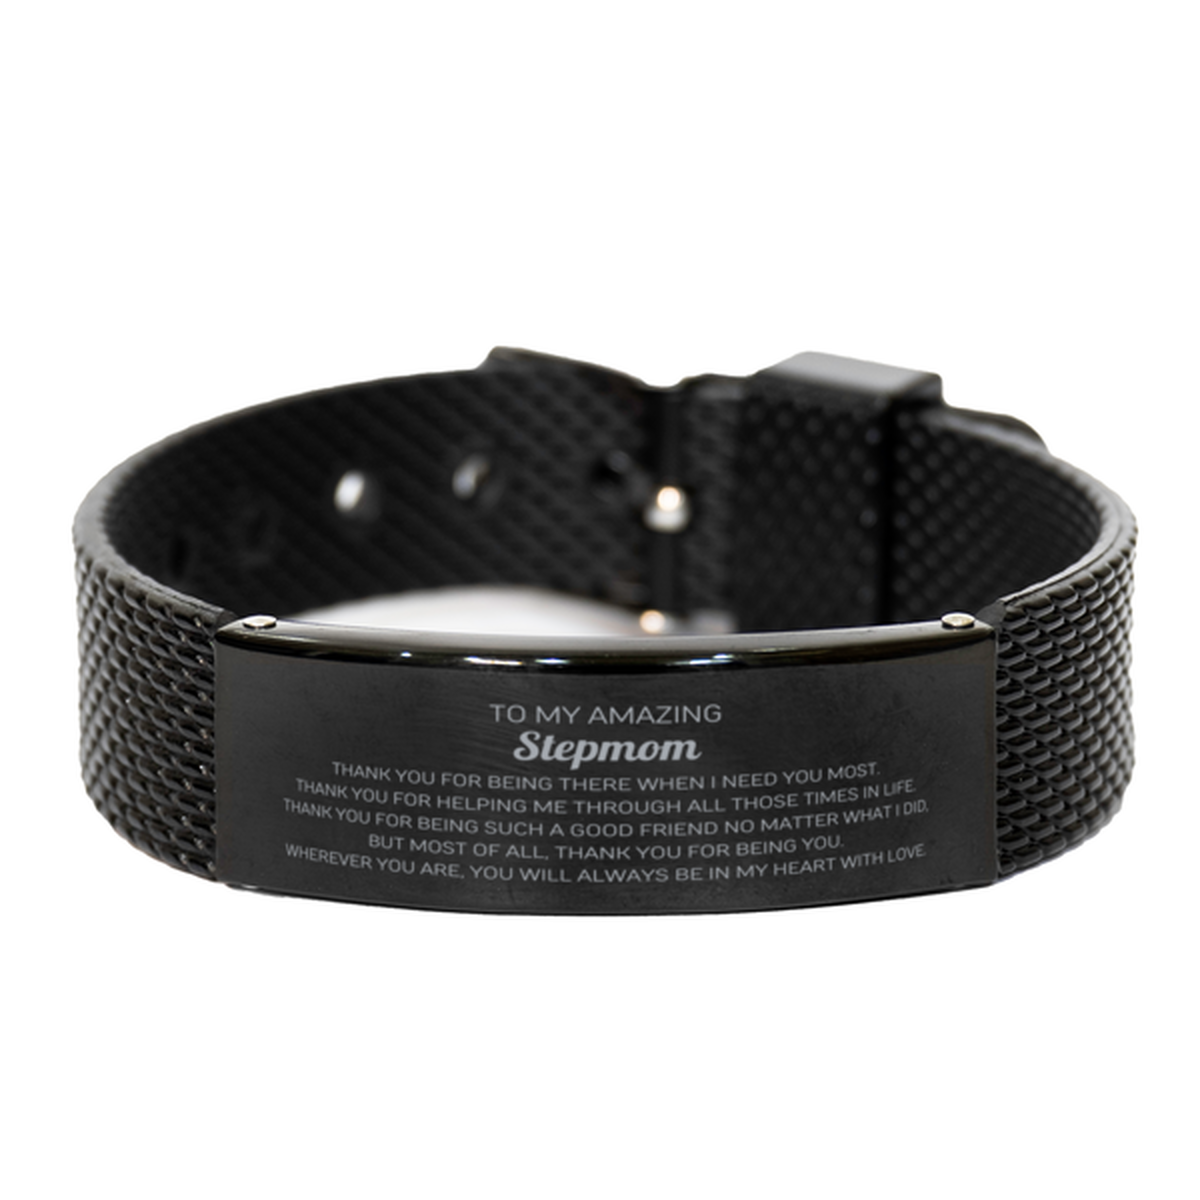 To My Amazing Stepmom Black Shark Mesh Bracelet, Thank you for being there, Thank You Gifts For Stepmom, Birthday, Christmas Unique Gifts For Stepmom